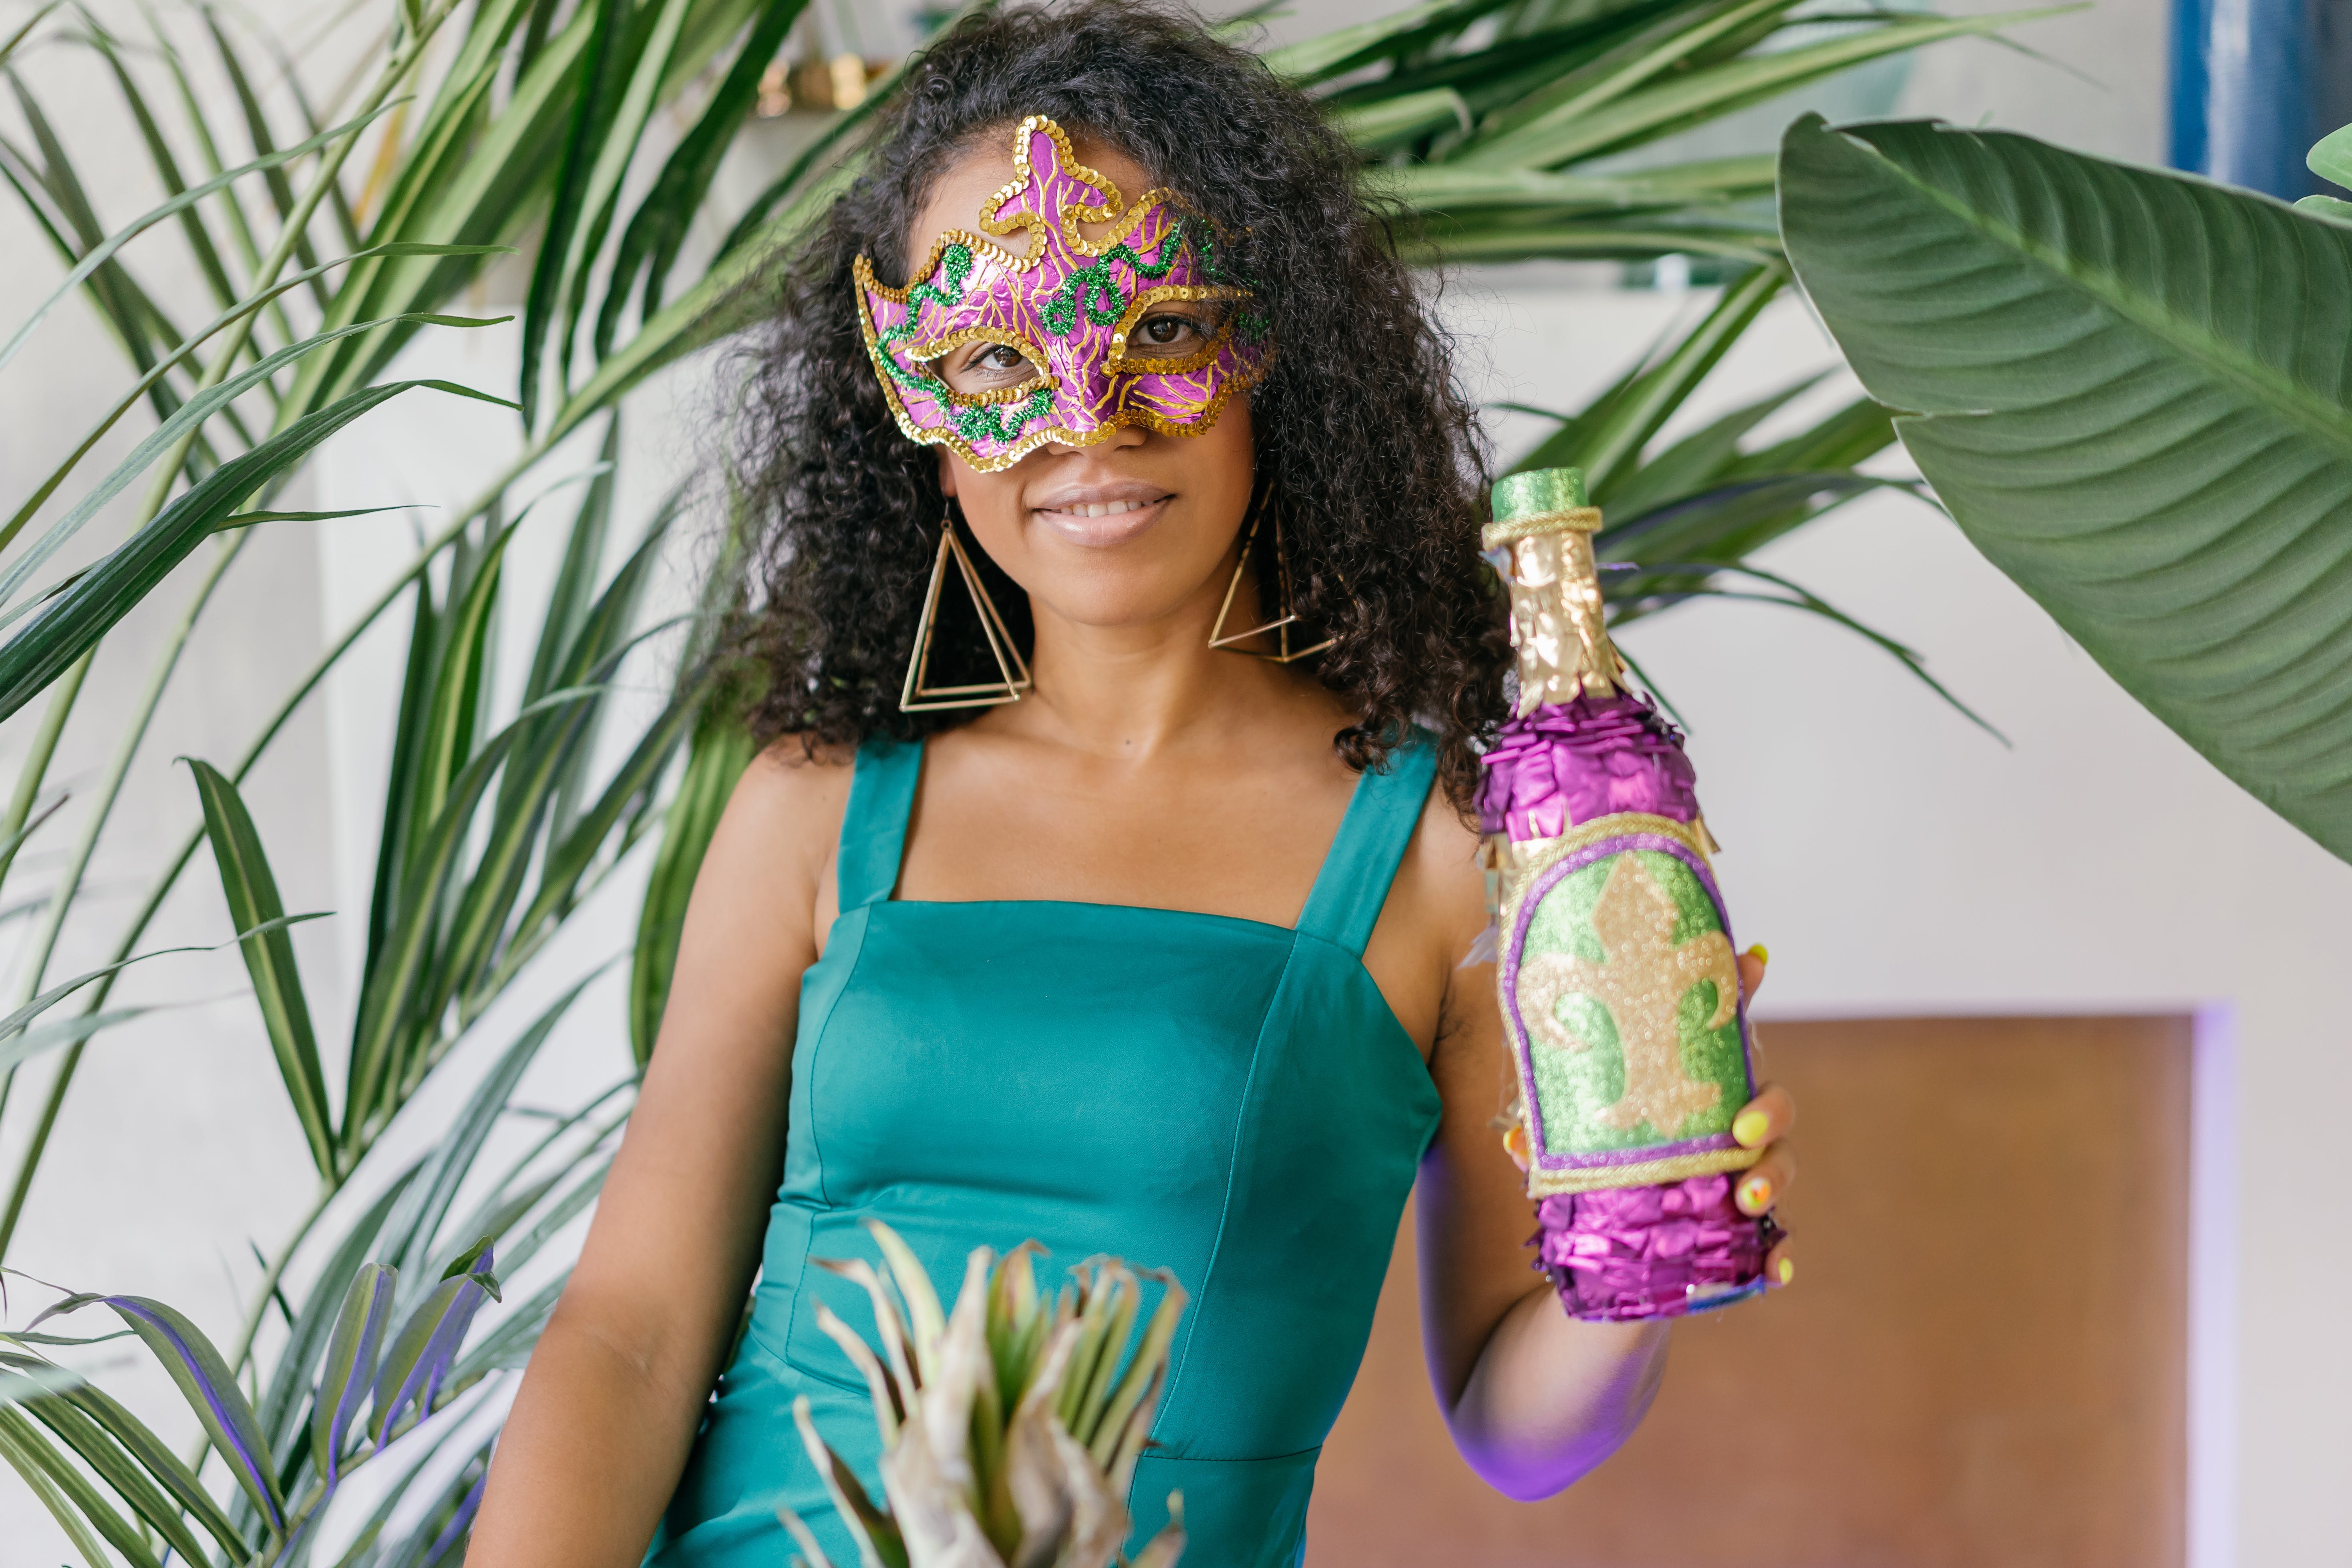 woman wearing green tank top and a mardi gras masquerade mask, holding up a bottle with the dleur de lis symbol